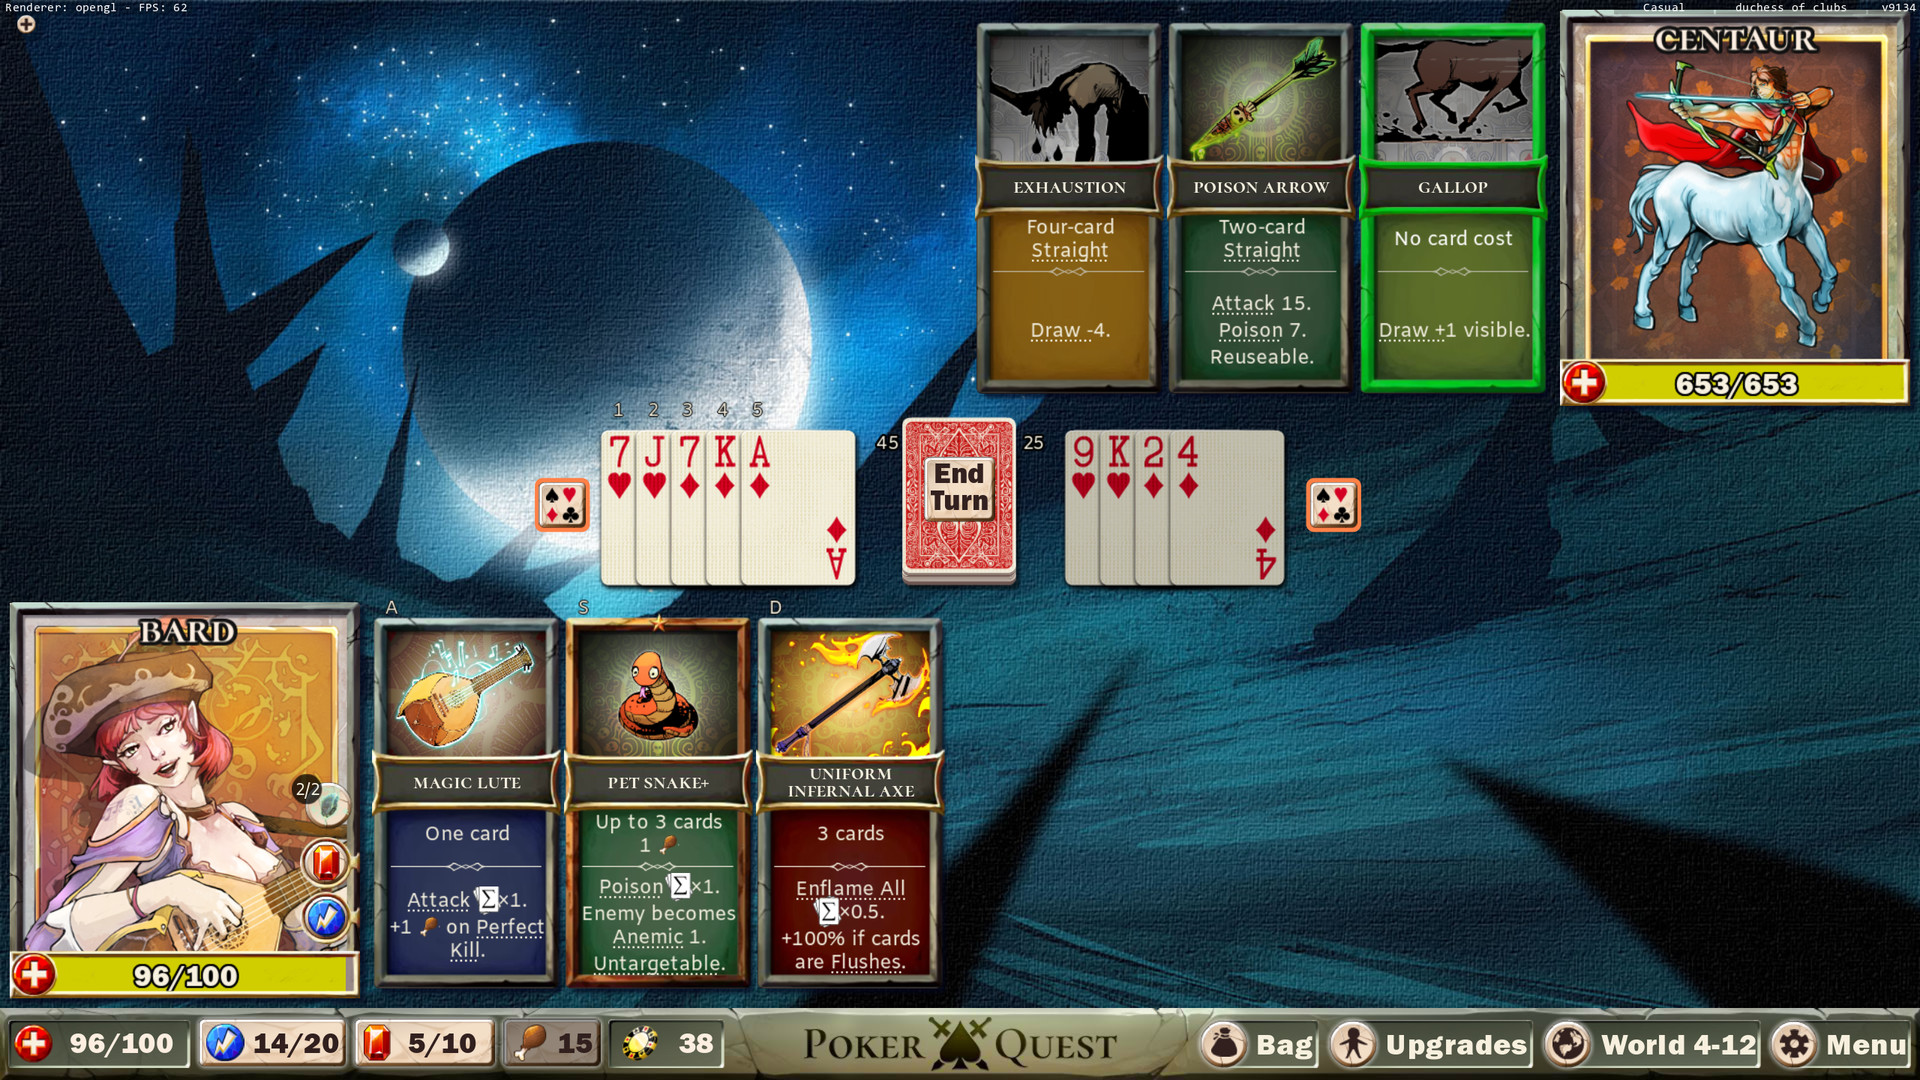 Poker Quest: Swords and Spades Free Download